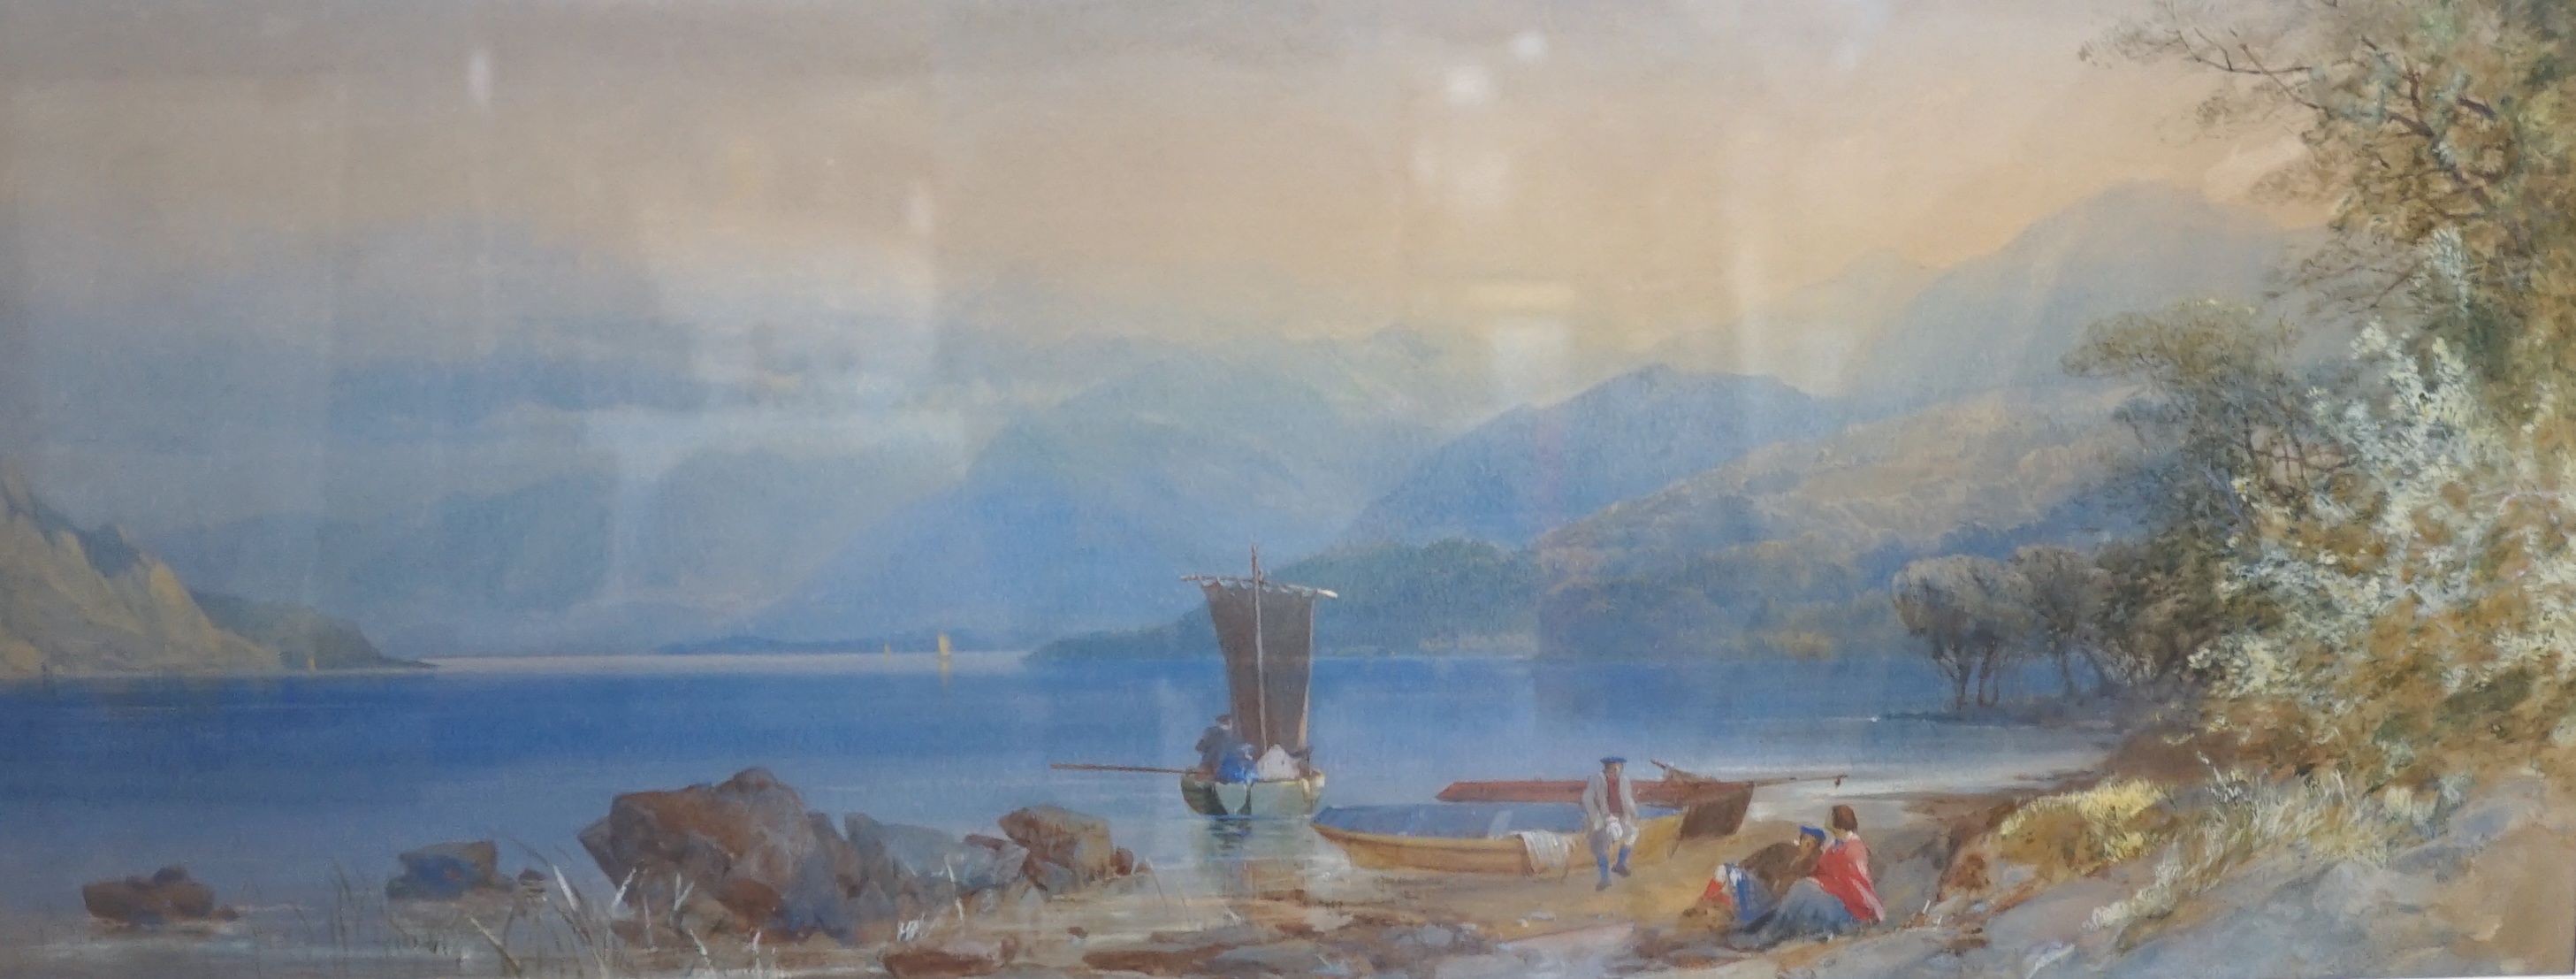 James Burrell Smith (1822-1897), Figures on the shore of Loch Katrine, bodycolour and watercolour, signed and dated 1862, 25.5 x 62.25cm